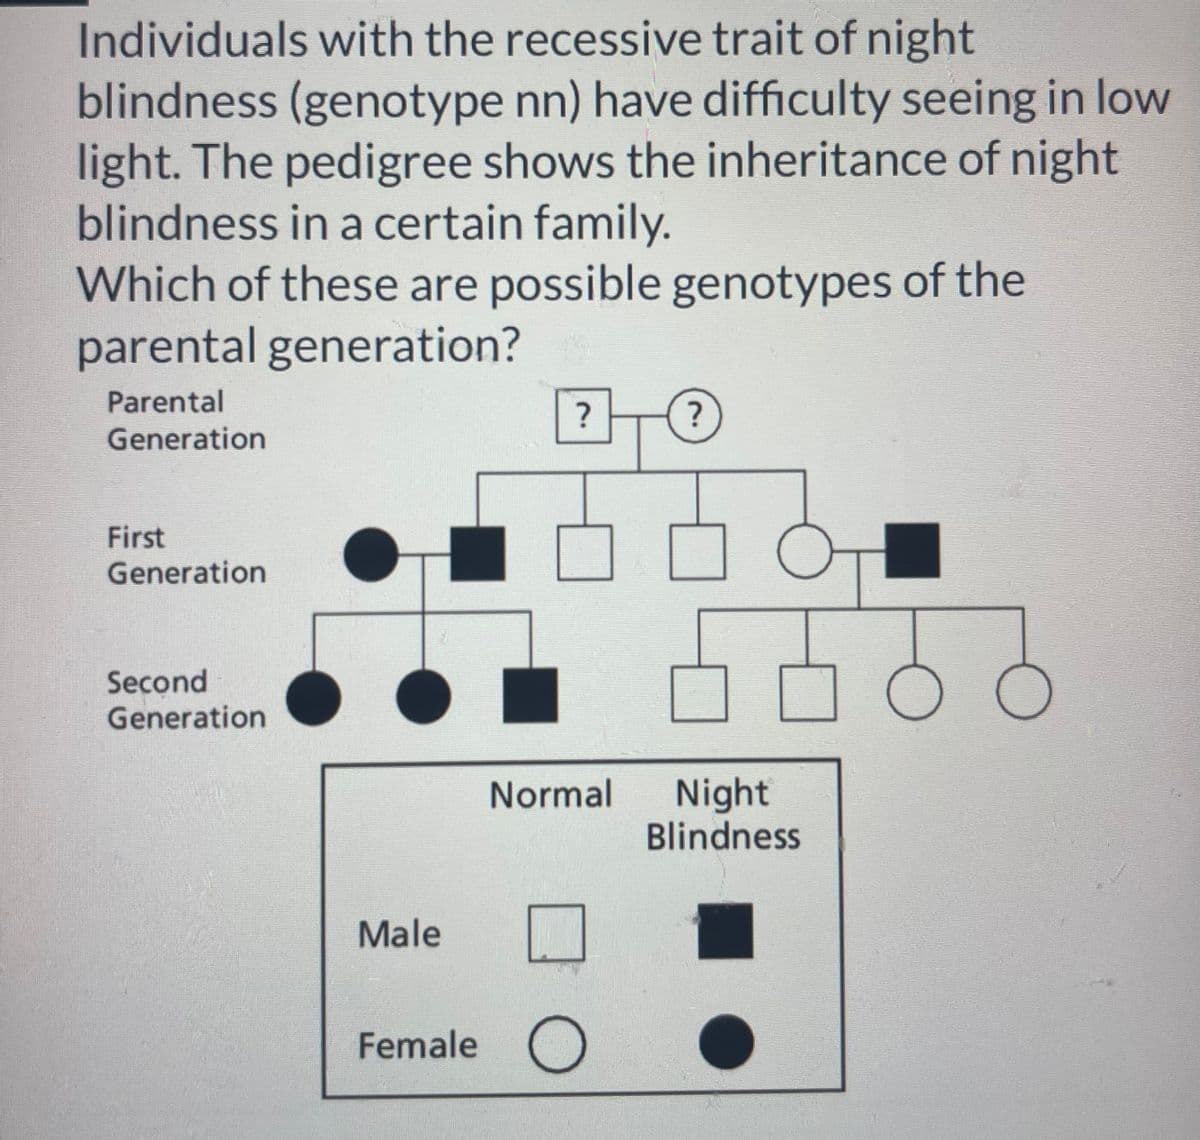 Individuals with the recessive trait of night
blindness (genotype nn) have difficulty seeing in low
light. The pedigree shows the inheritance of night
blindness in a certain family.
Which of these are possible genotypes of the
parental generation?
Parental
Generation
First
Generation
Second
Generation
Male
?
?
Normal Night
Blindness
Female O